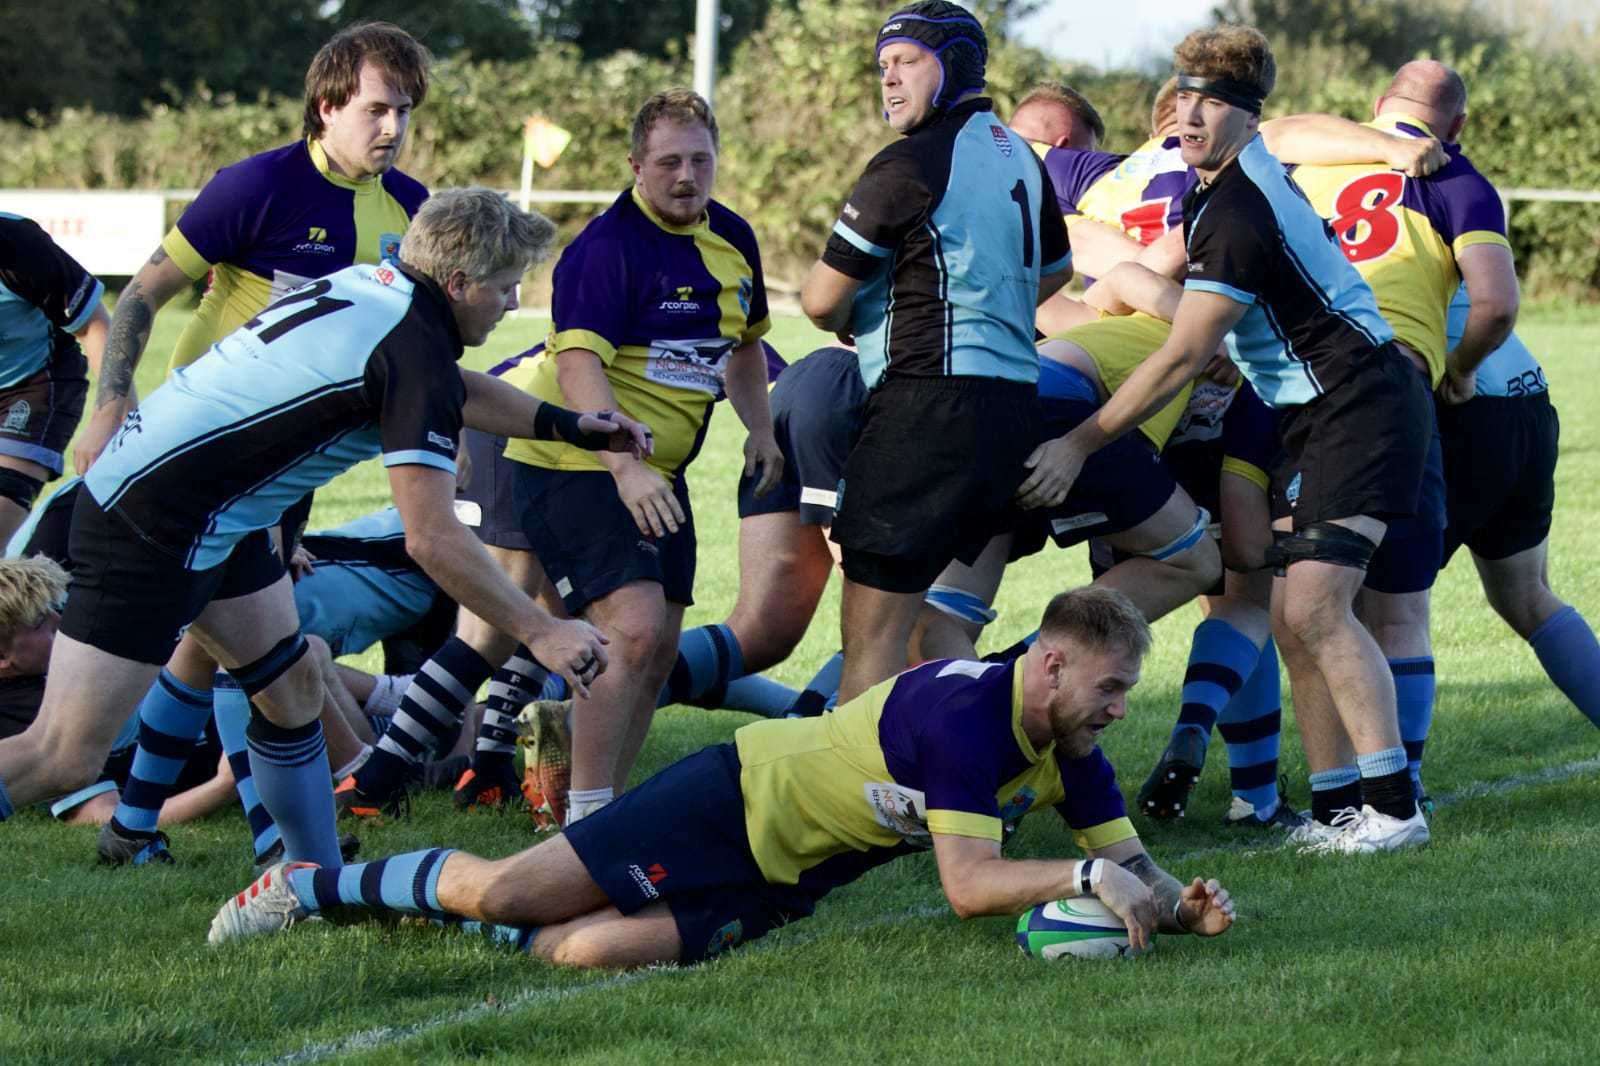 Action between Fakenham and Woodbridge at The Stringer Ground on Saturday. Picture: James Peeling